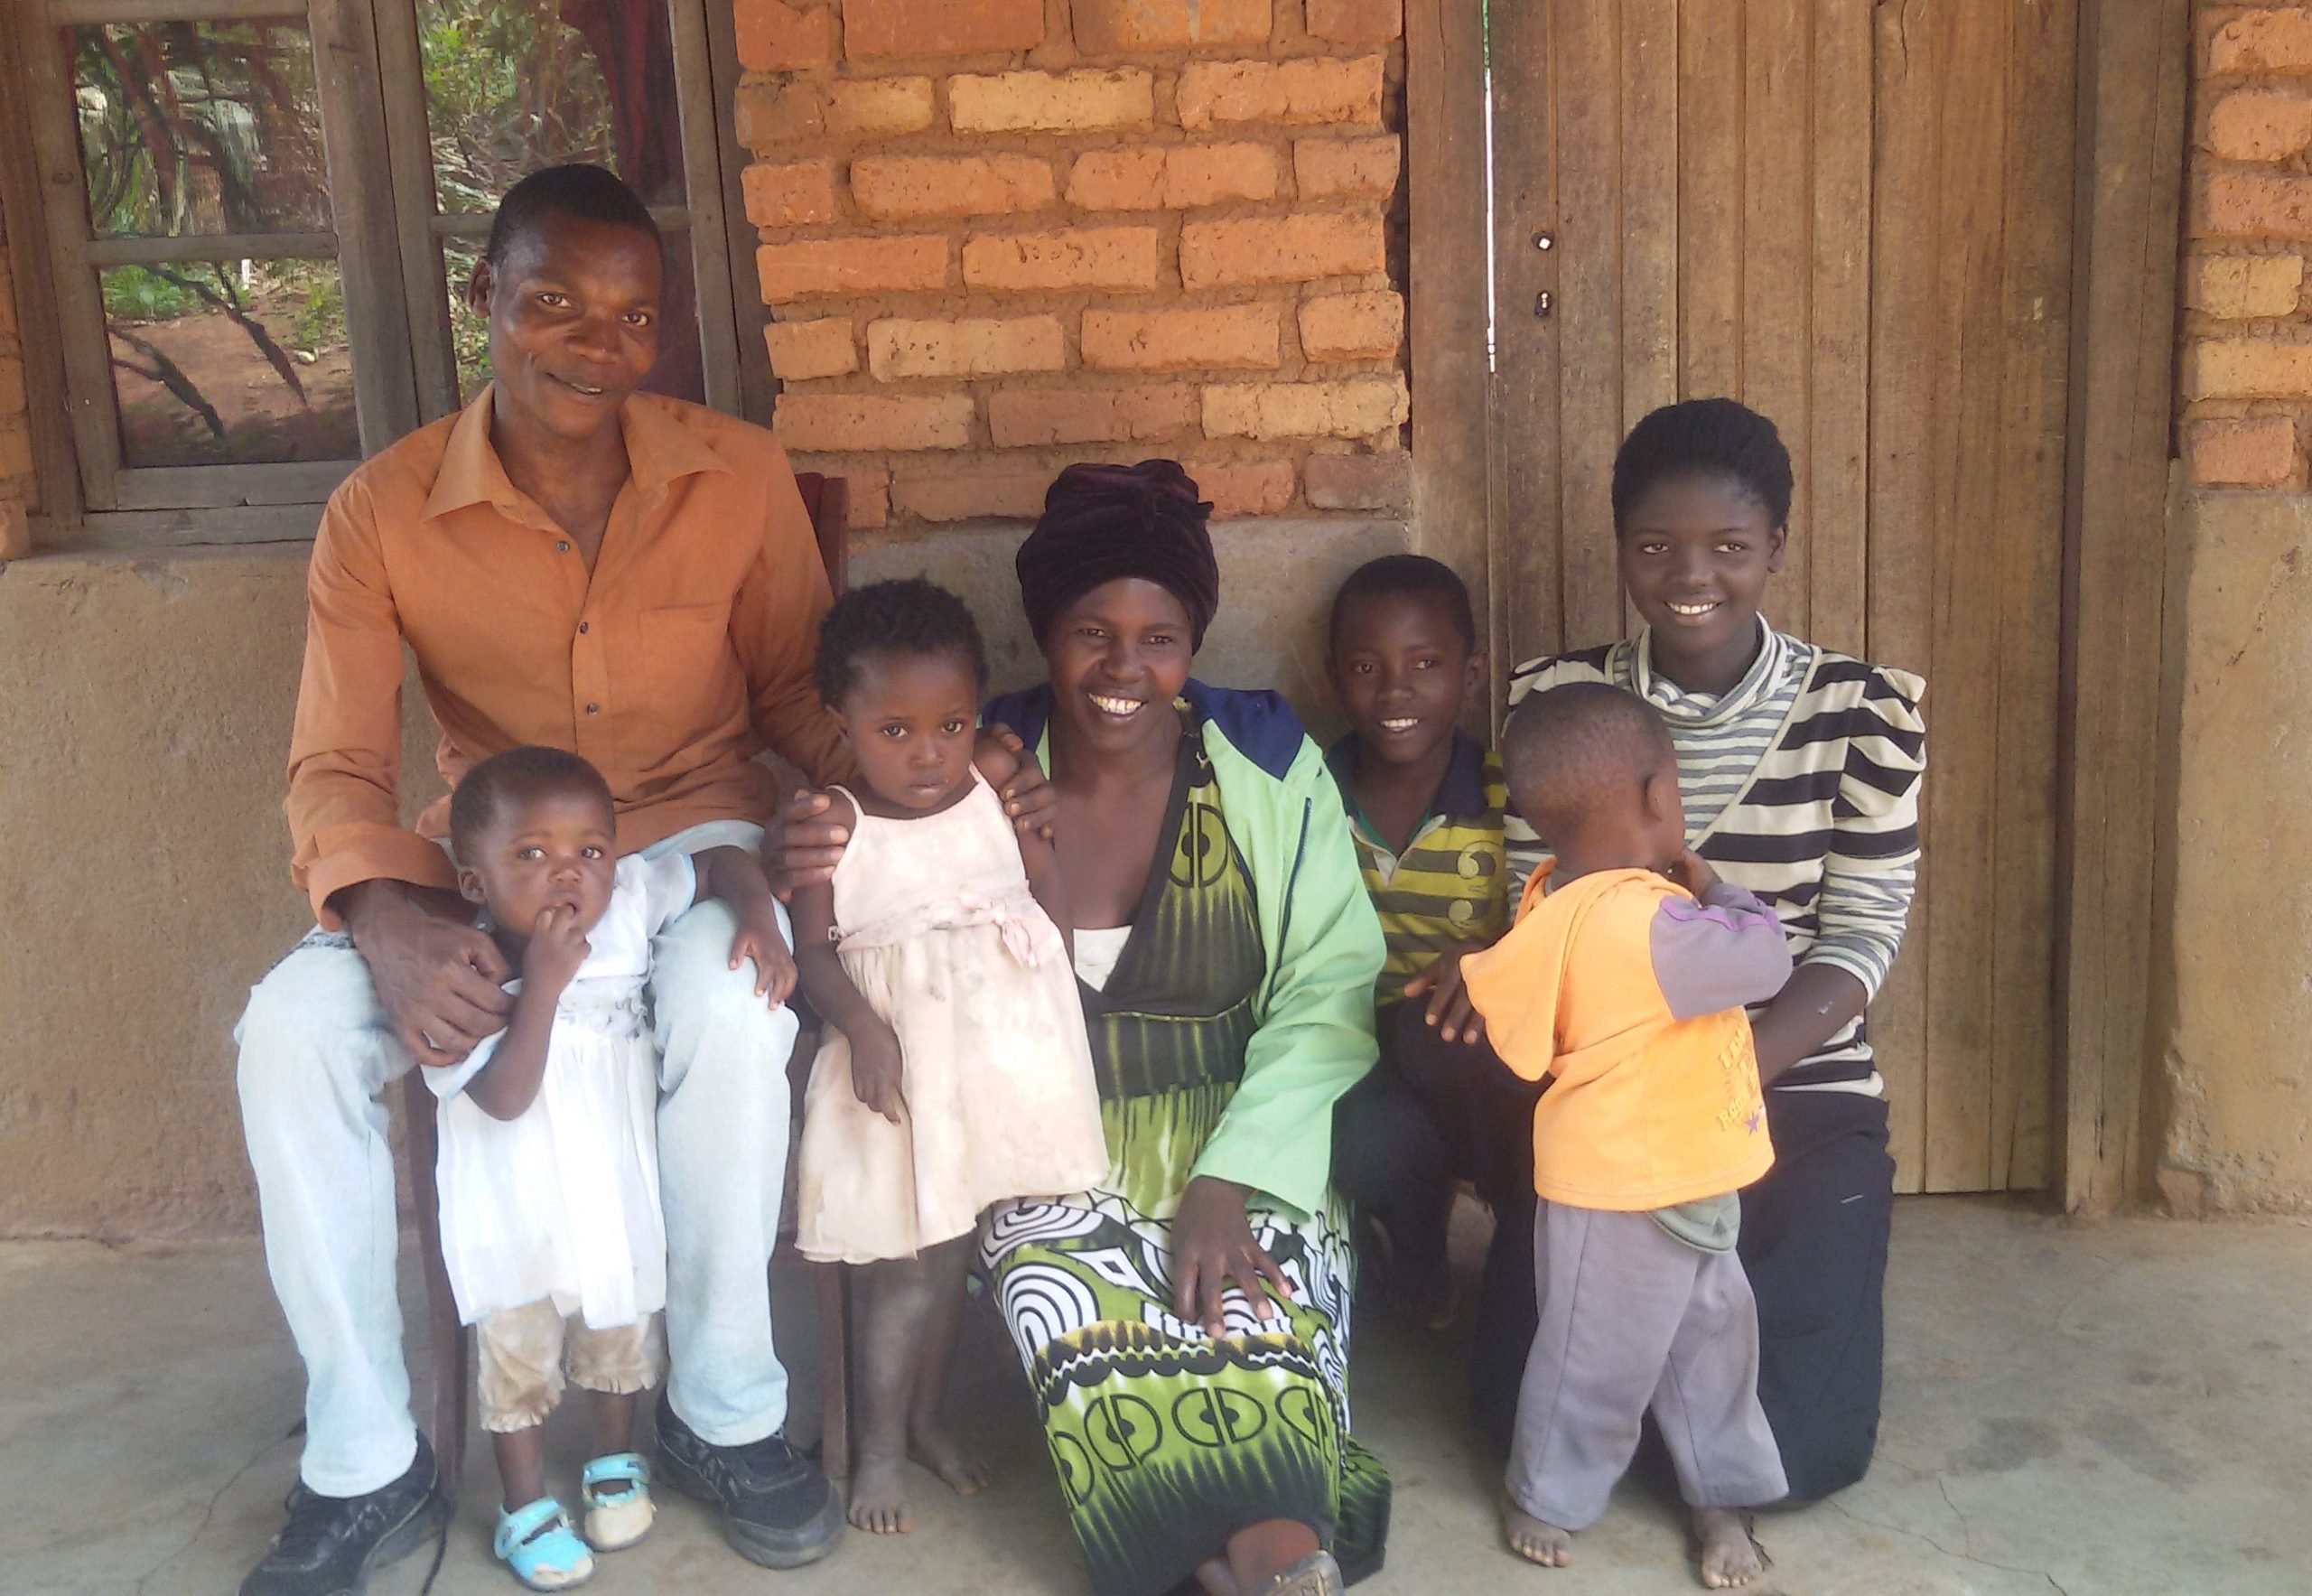 Lydia (centre) and her family in Malawi